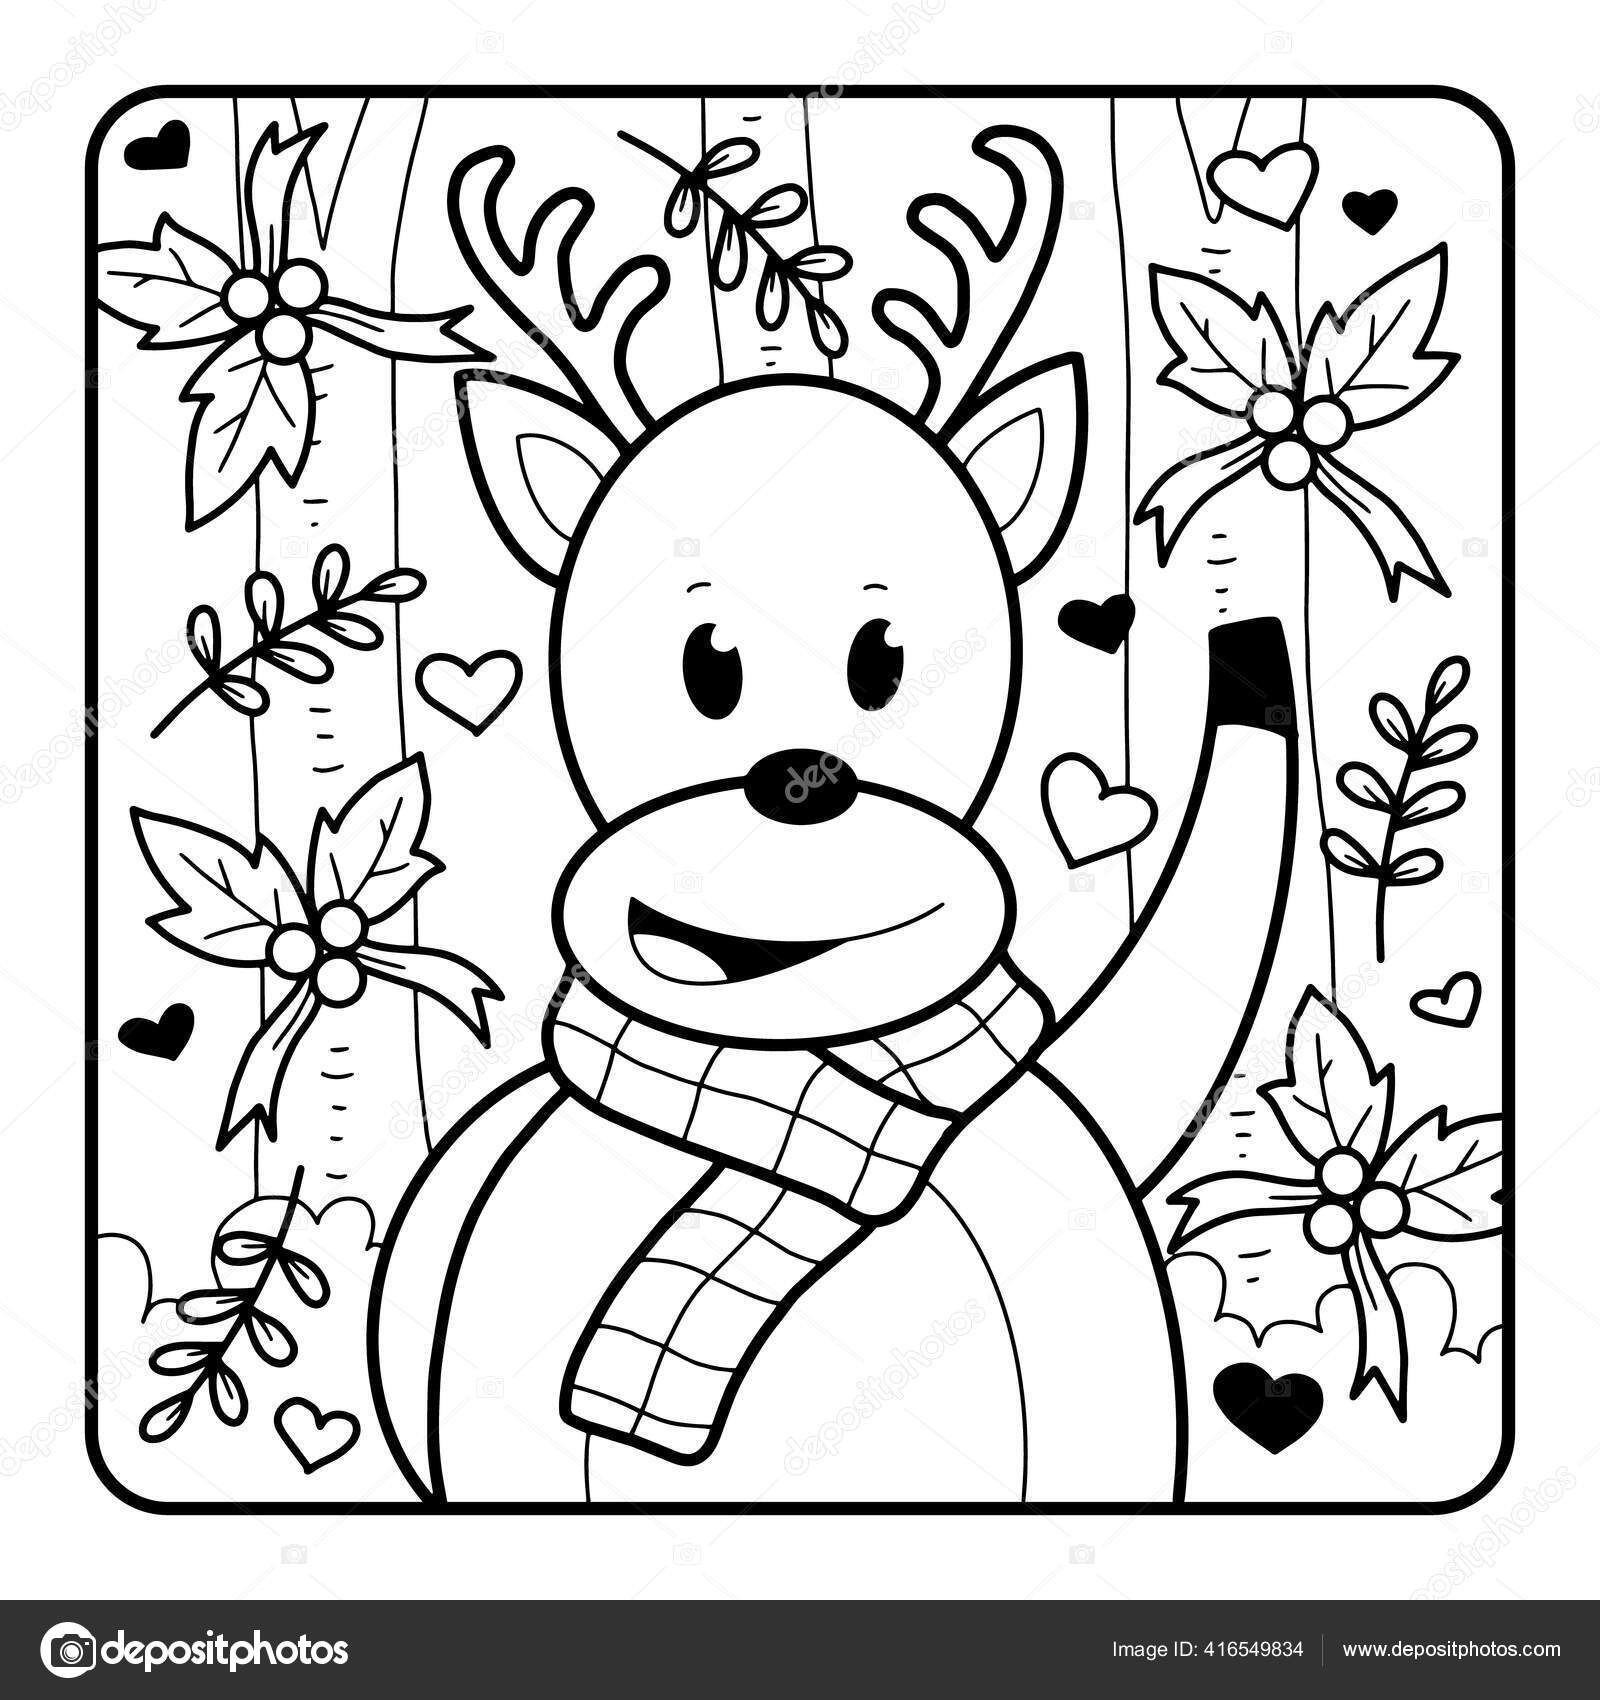 Christmas Coloring Page Kids Download Cute Adorable Christmas ...